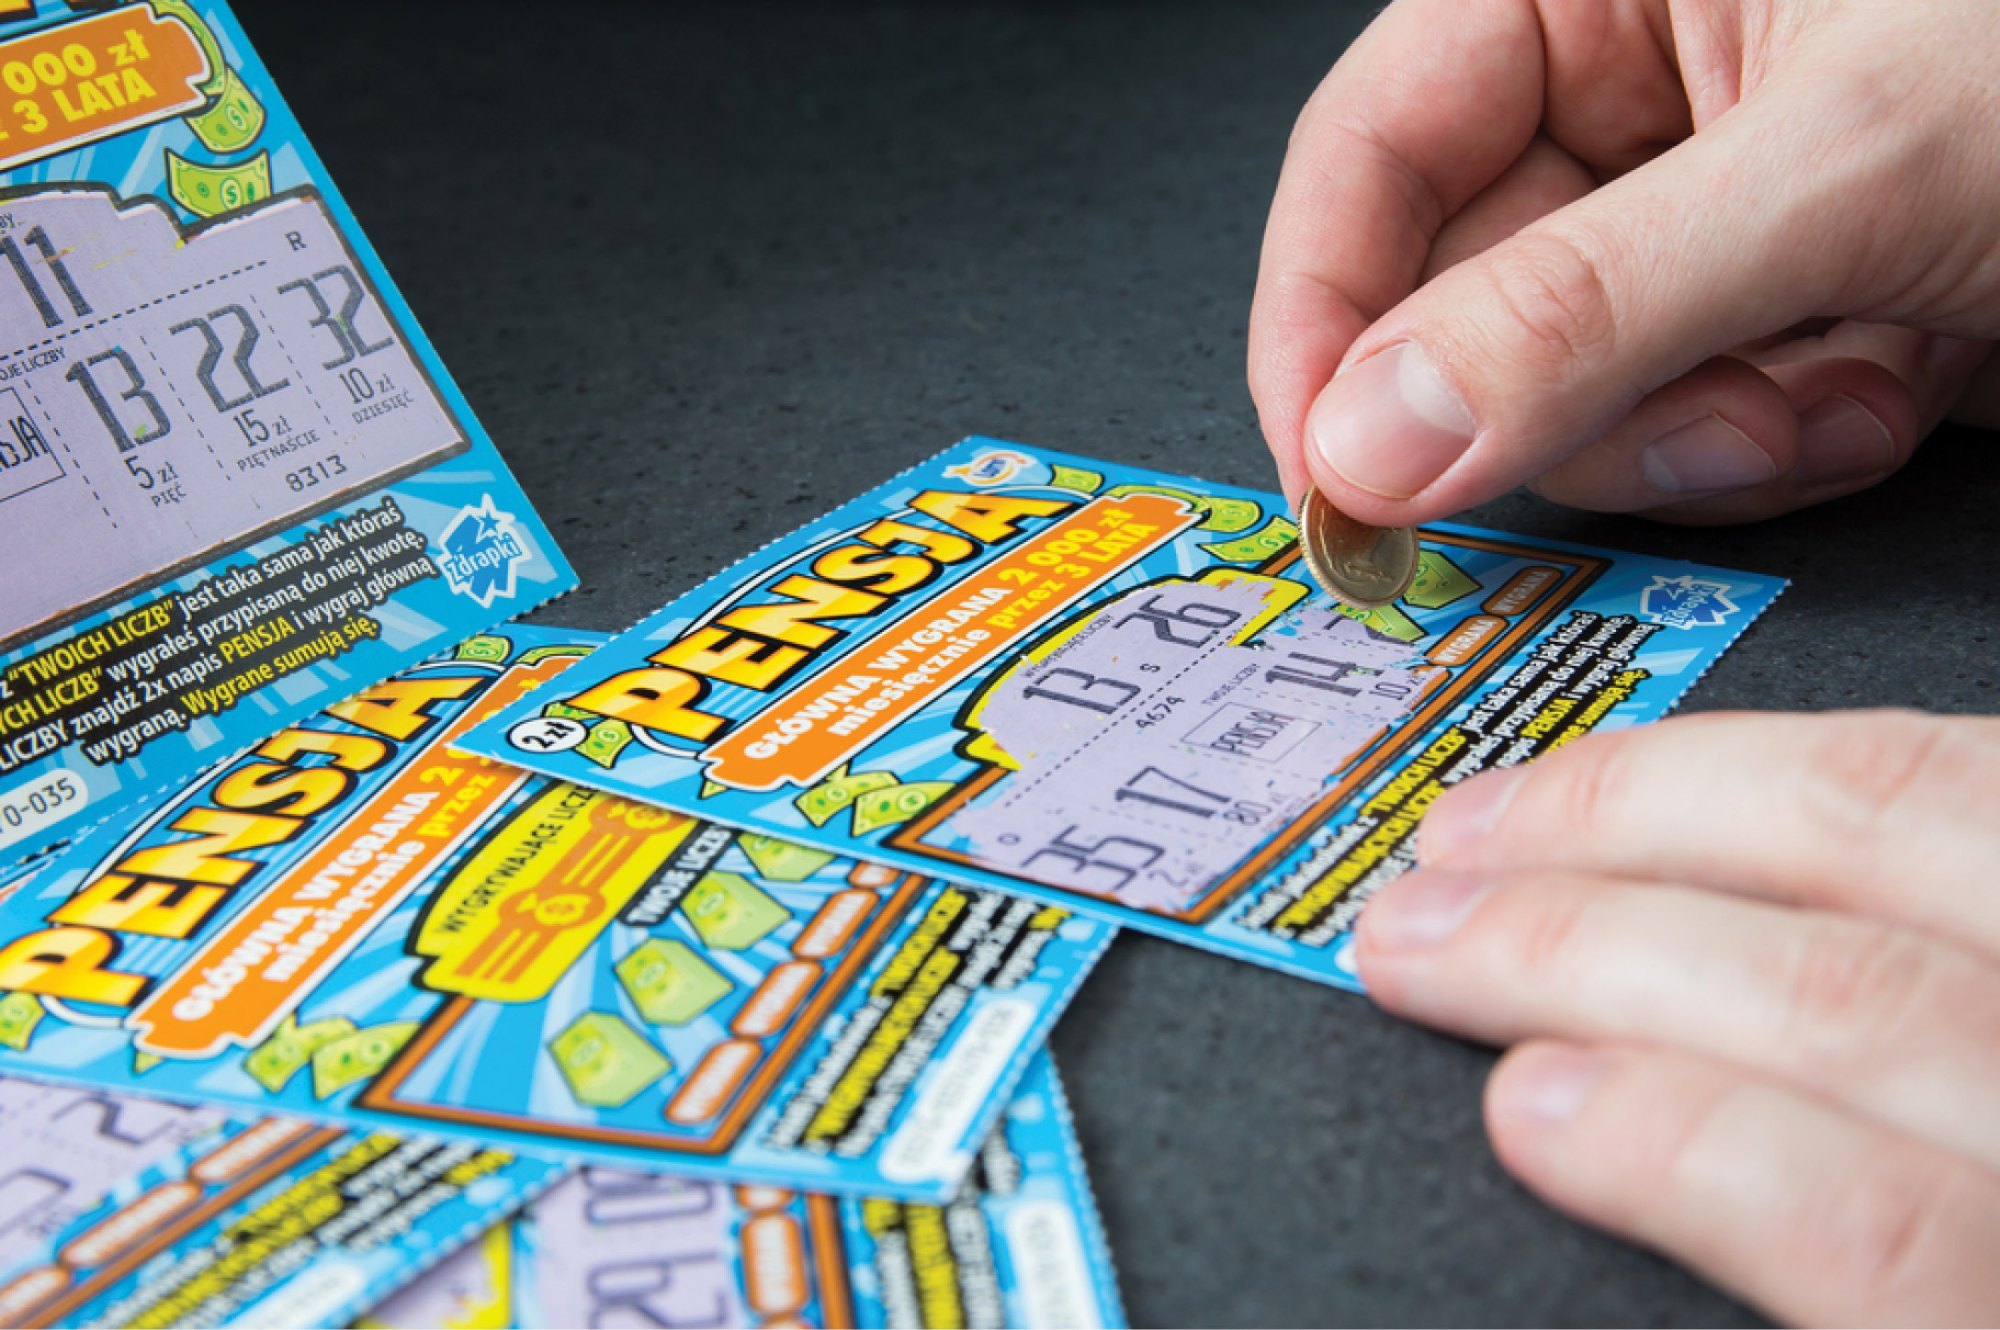 Free Scratch Cards Games